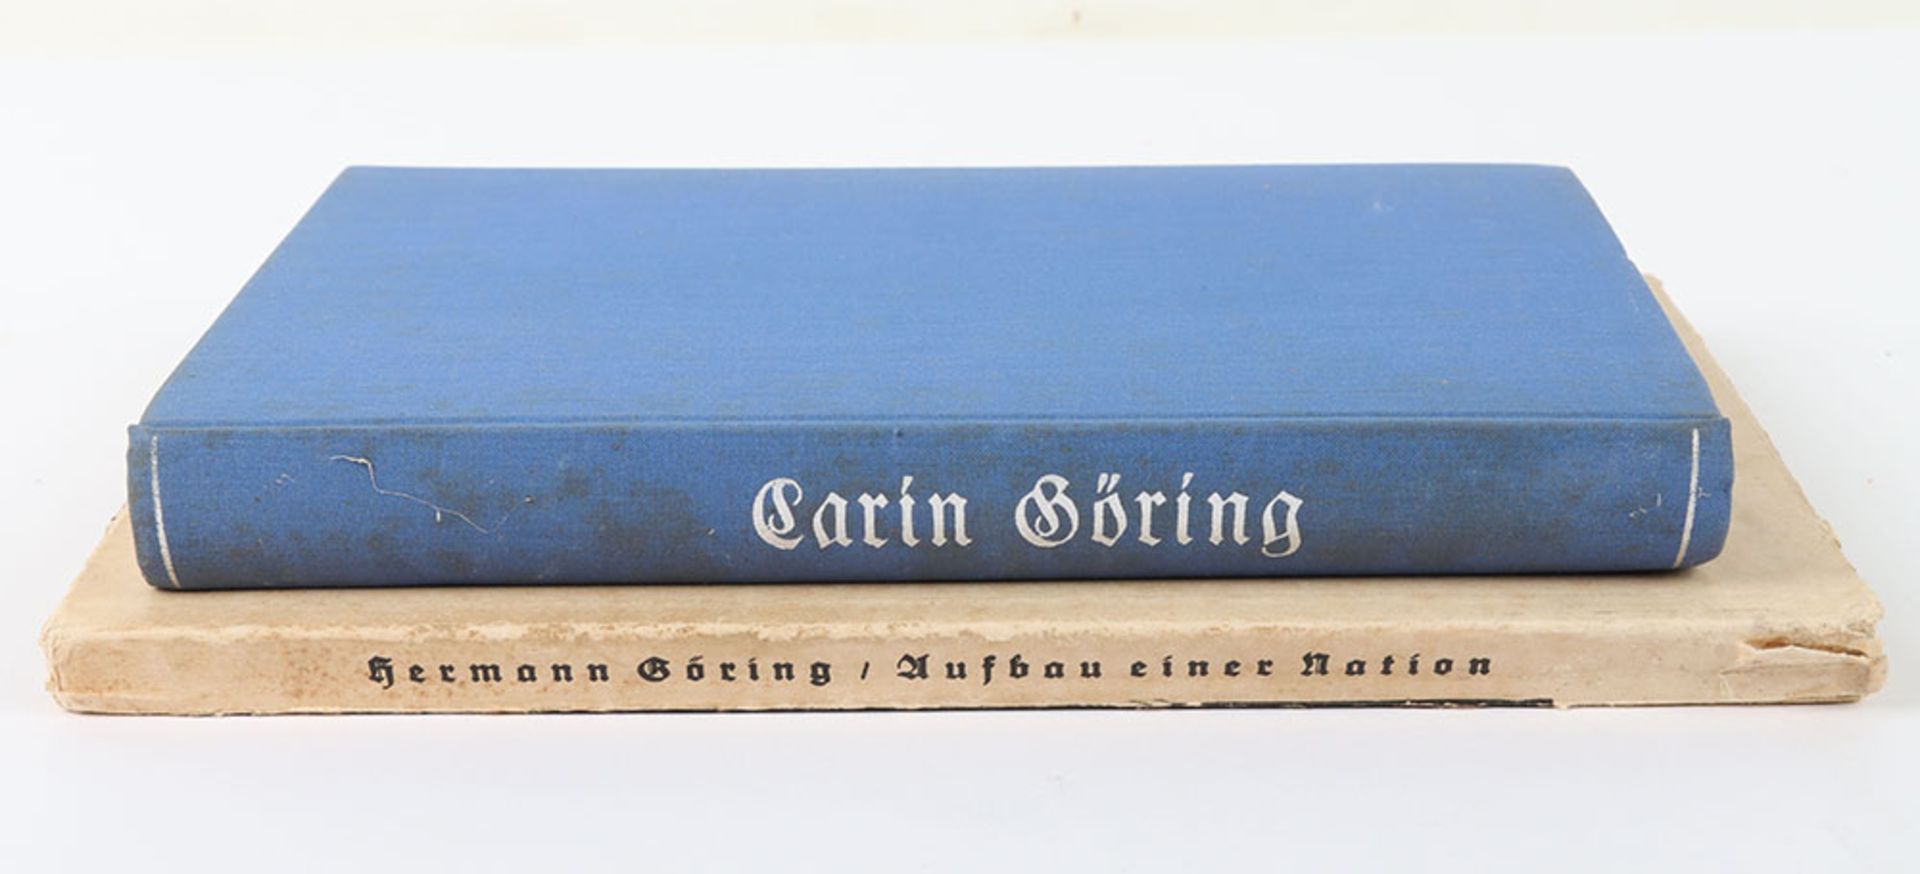 Building One Nation Book by Herman Goring and Carin Goring Books - Image 2 of 3